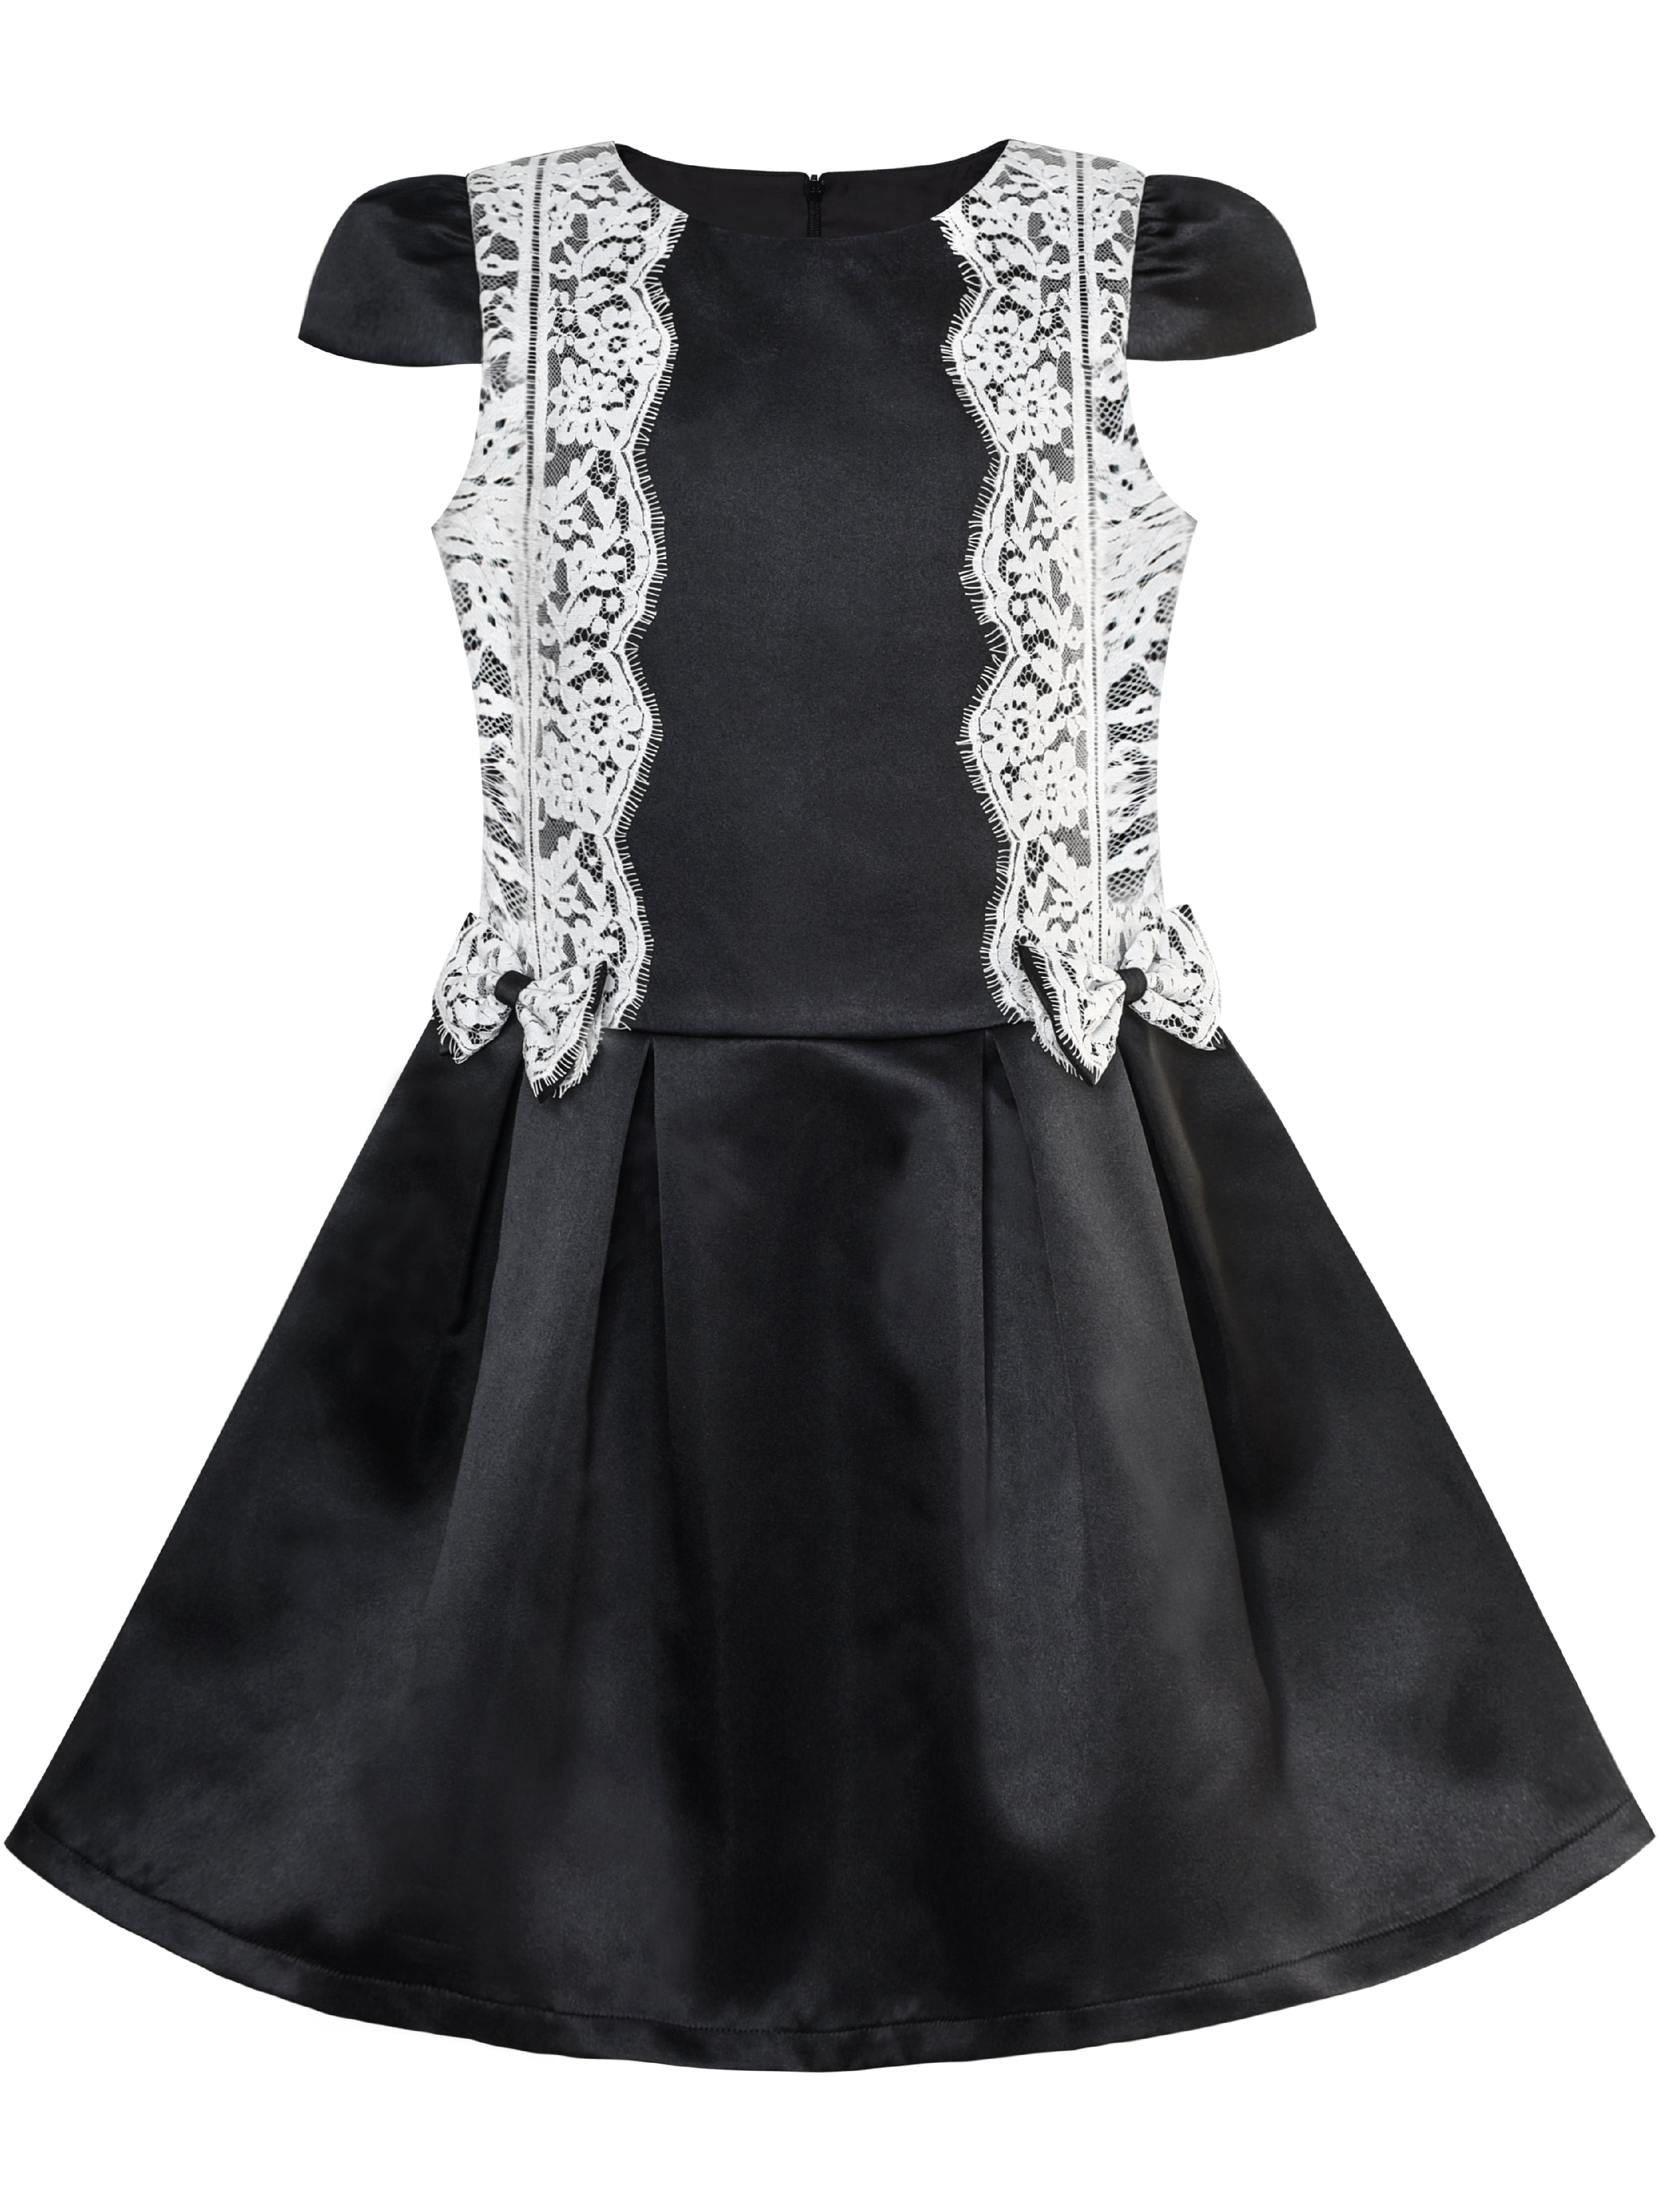 Sunny Fashion Girls Dress Black White Color Contrast Lace Bow Tie Size 6-10